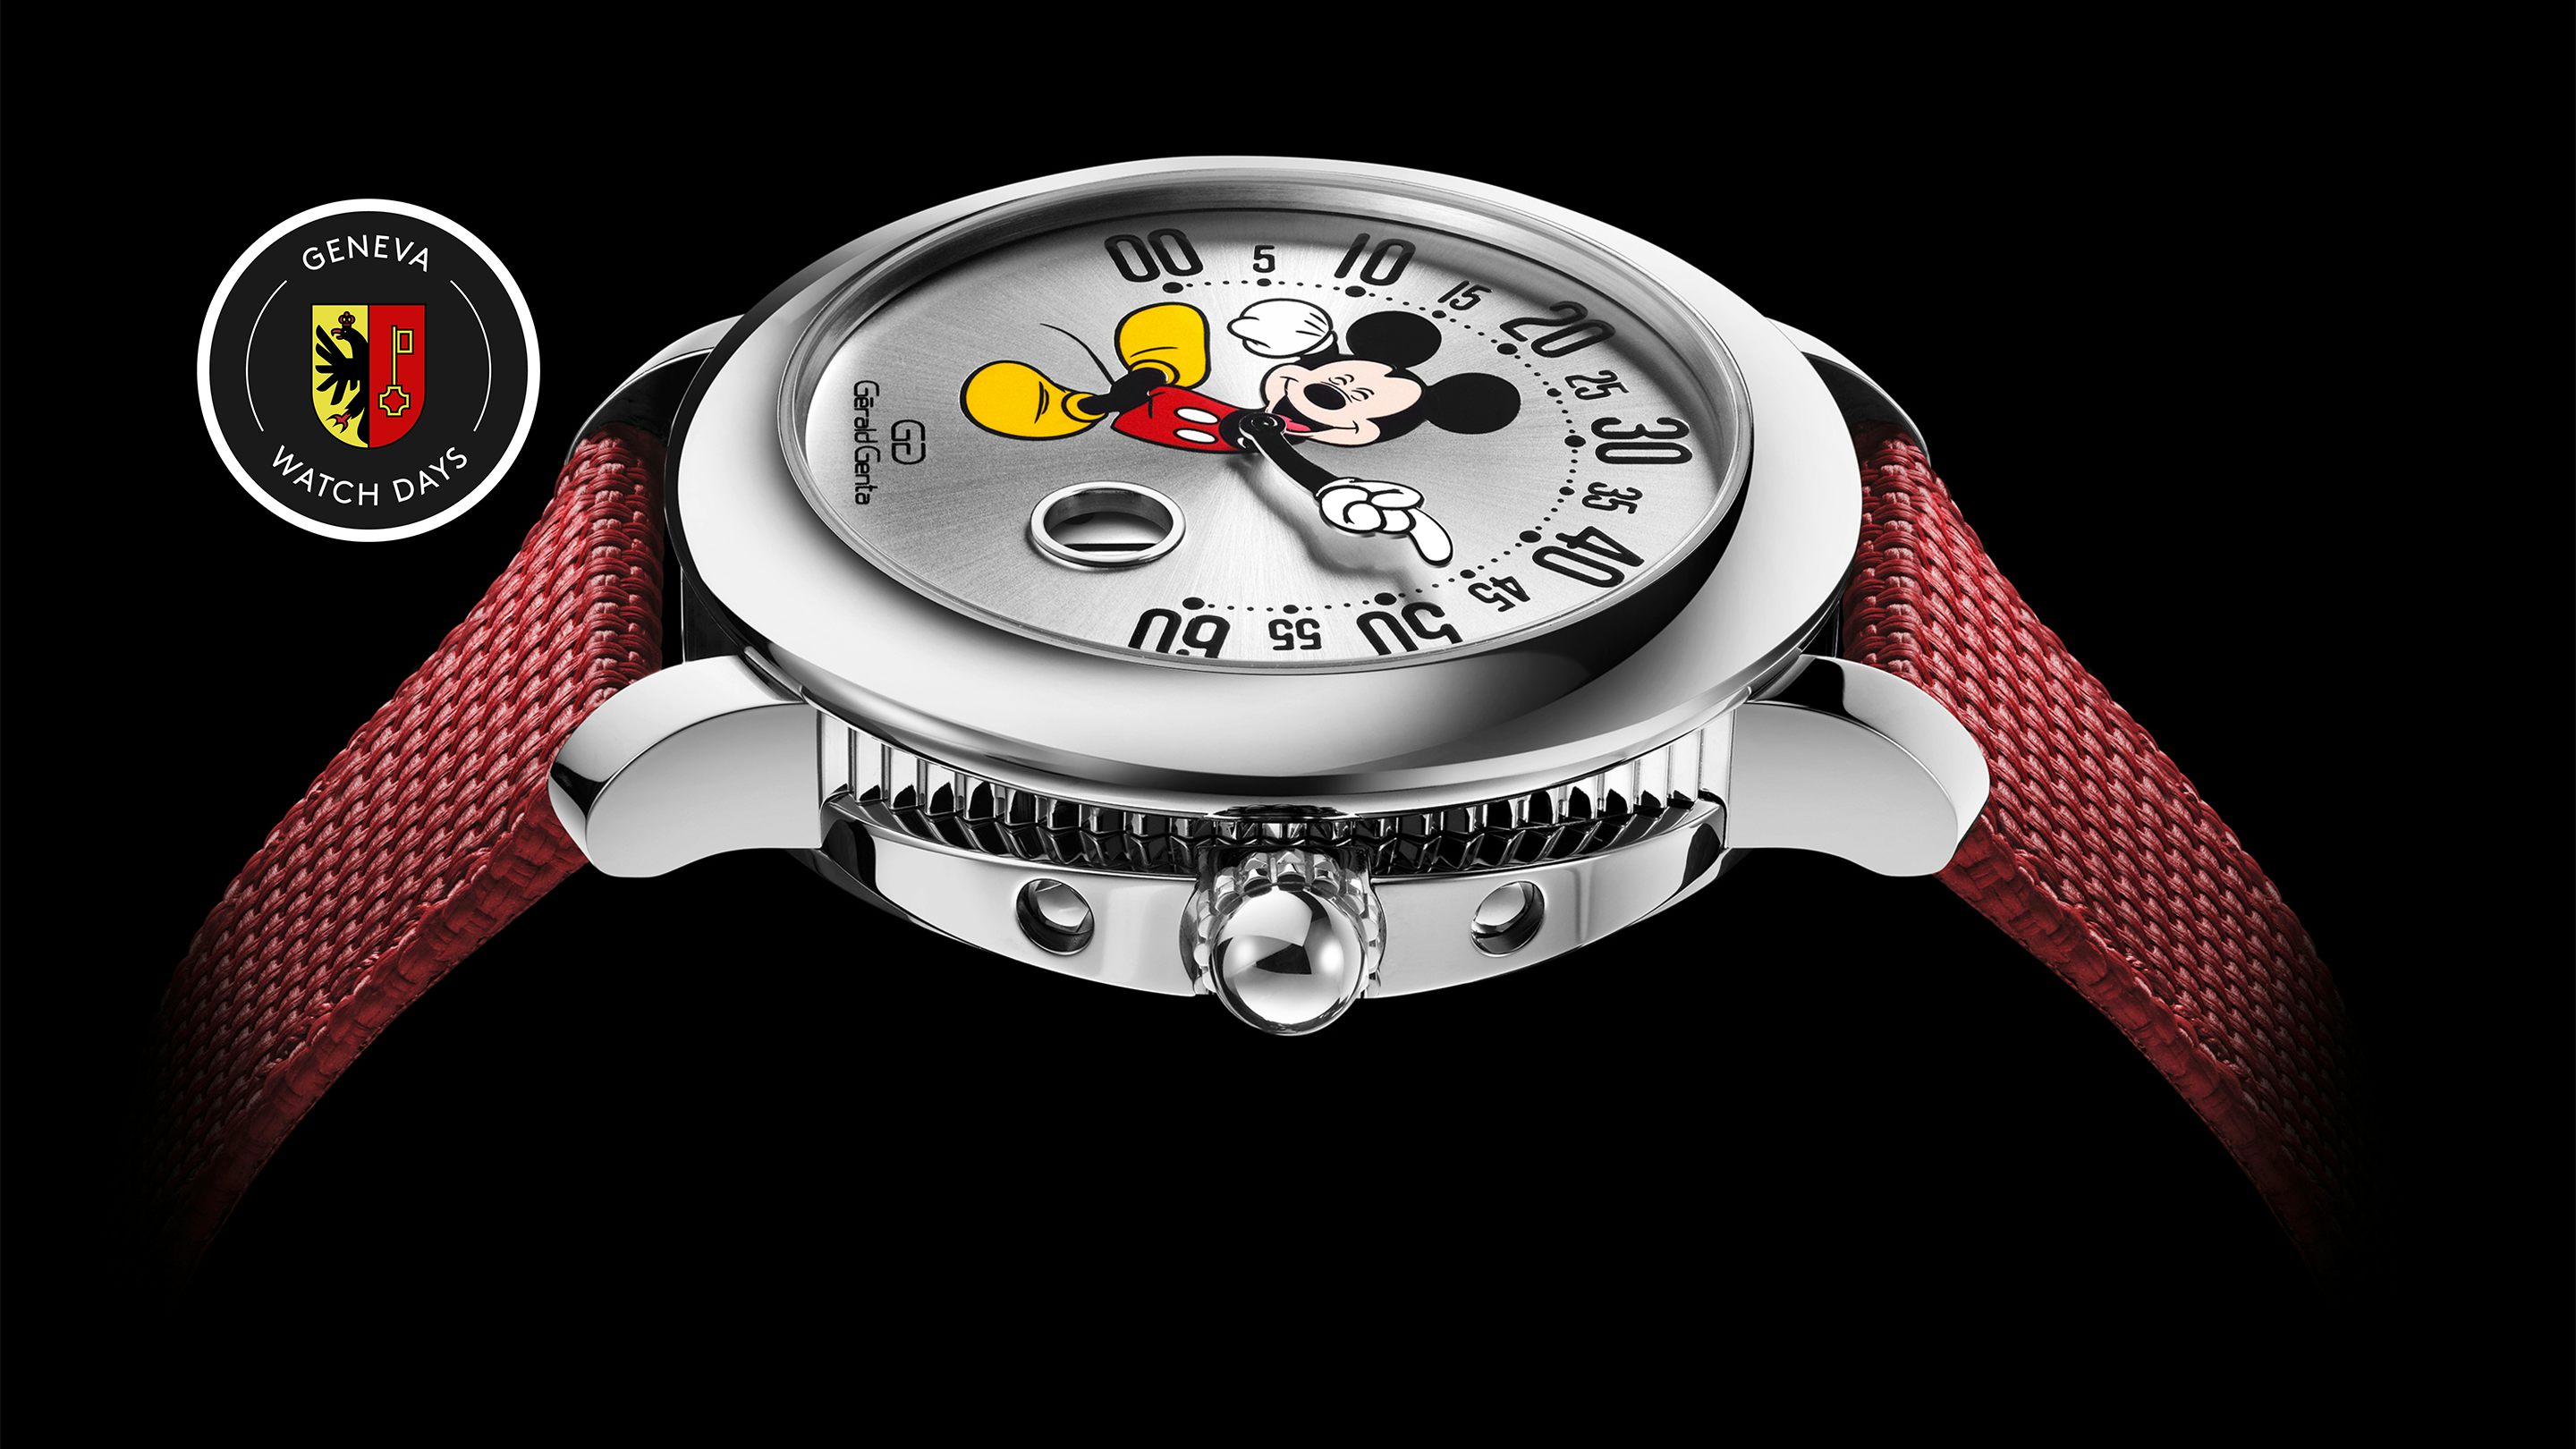 The New Gérald Gentra Retro Mickey From Bulgari At Watches And Wonders 2021